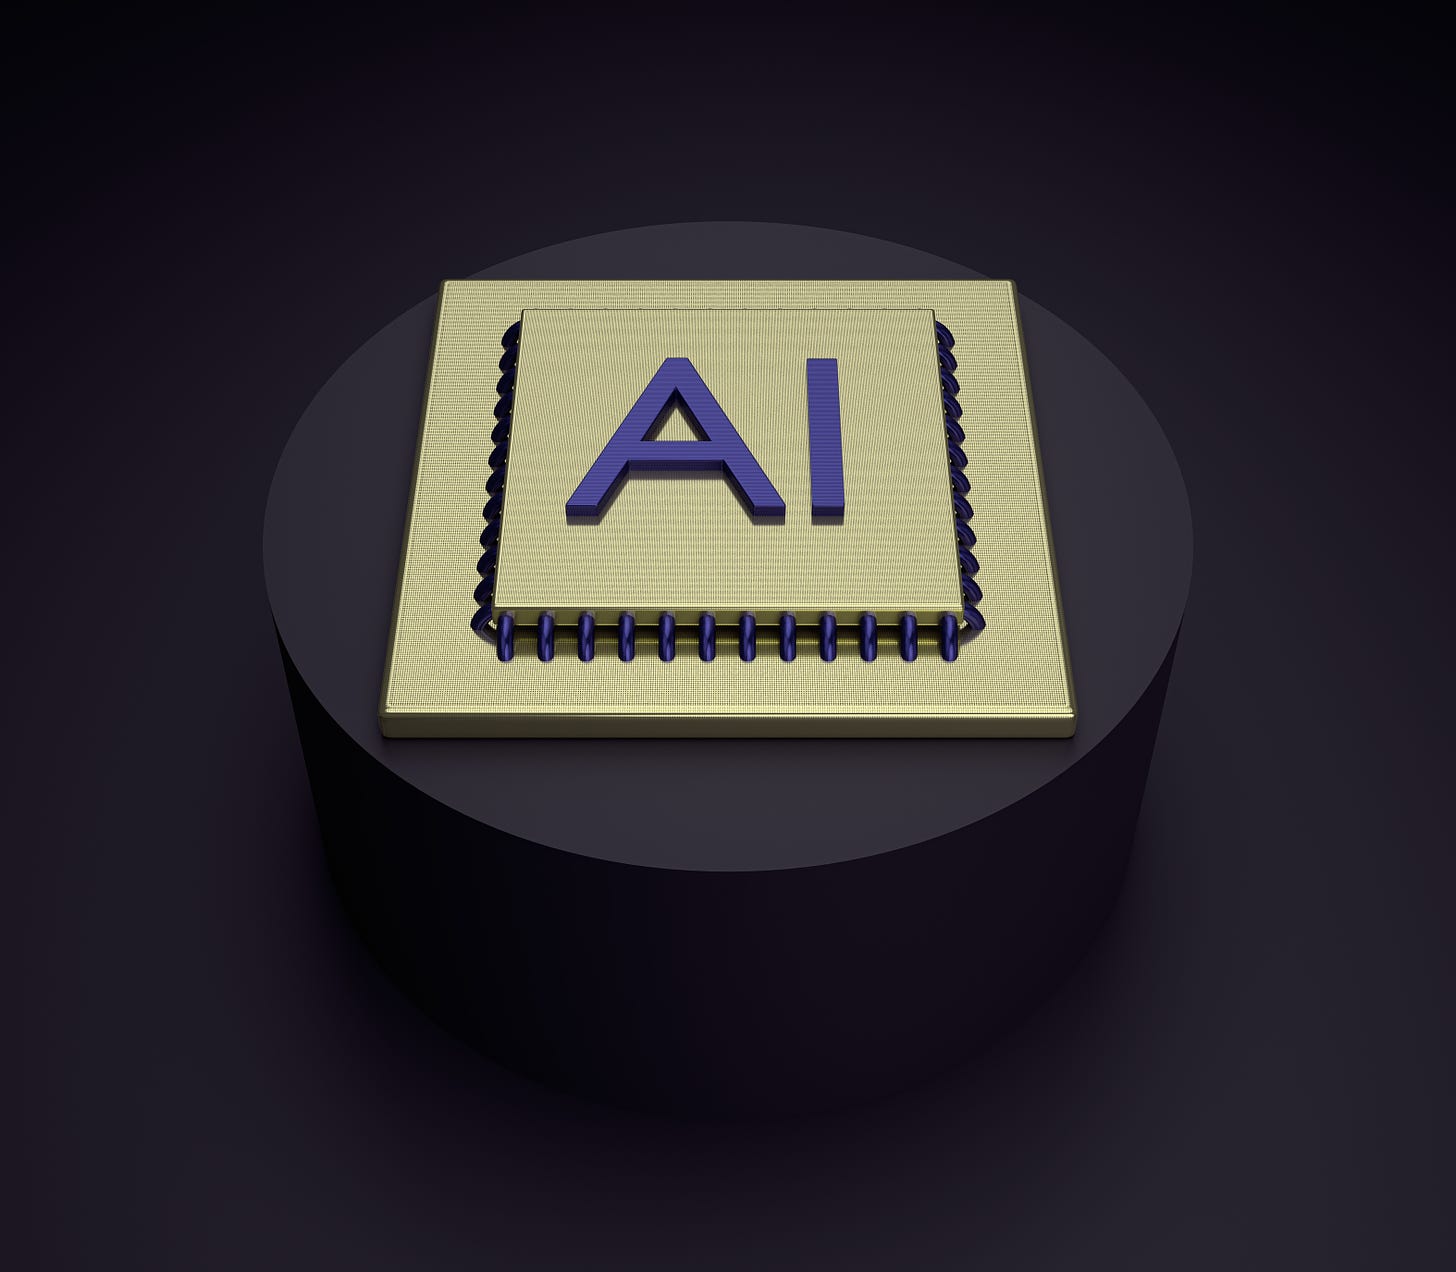 Computer chip with AI written on it